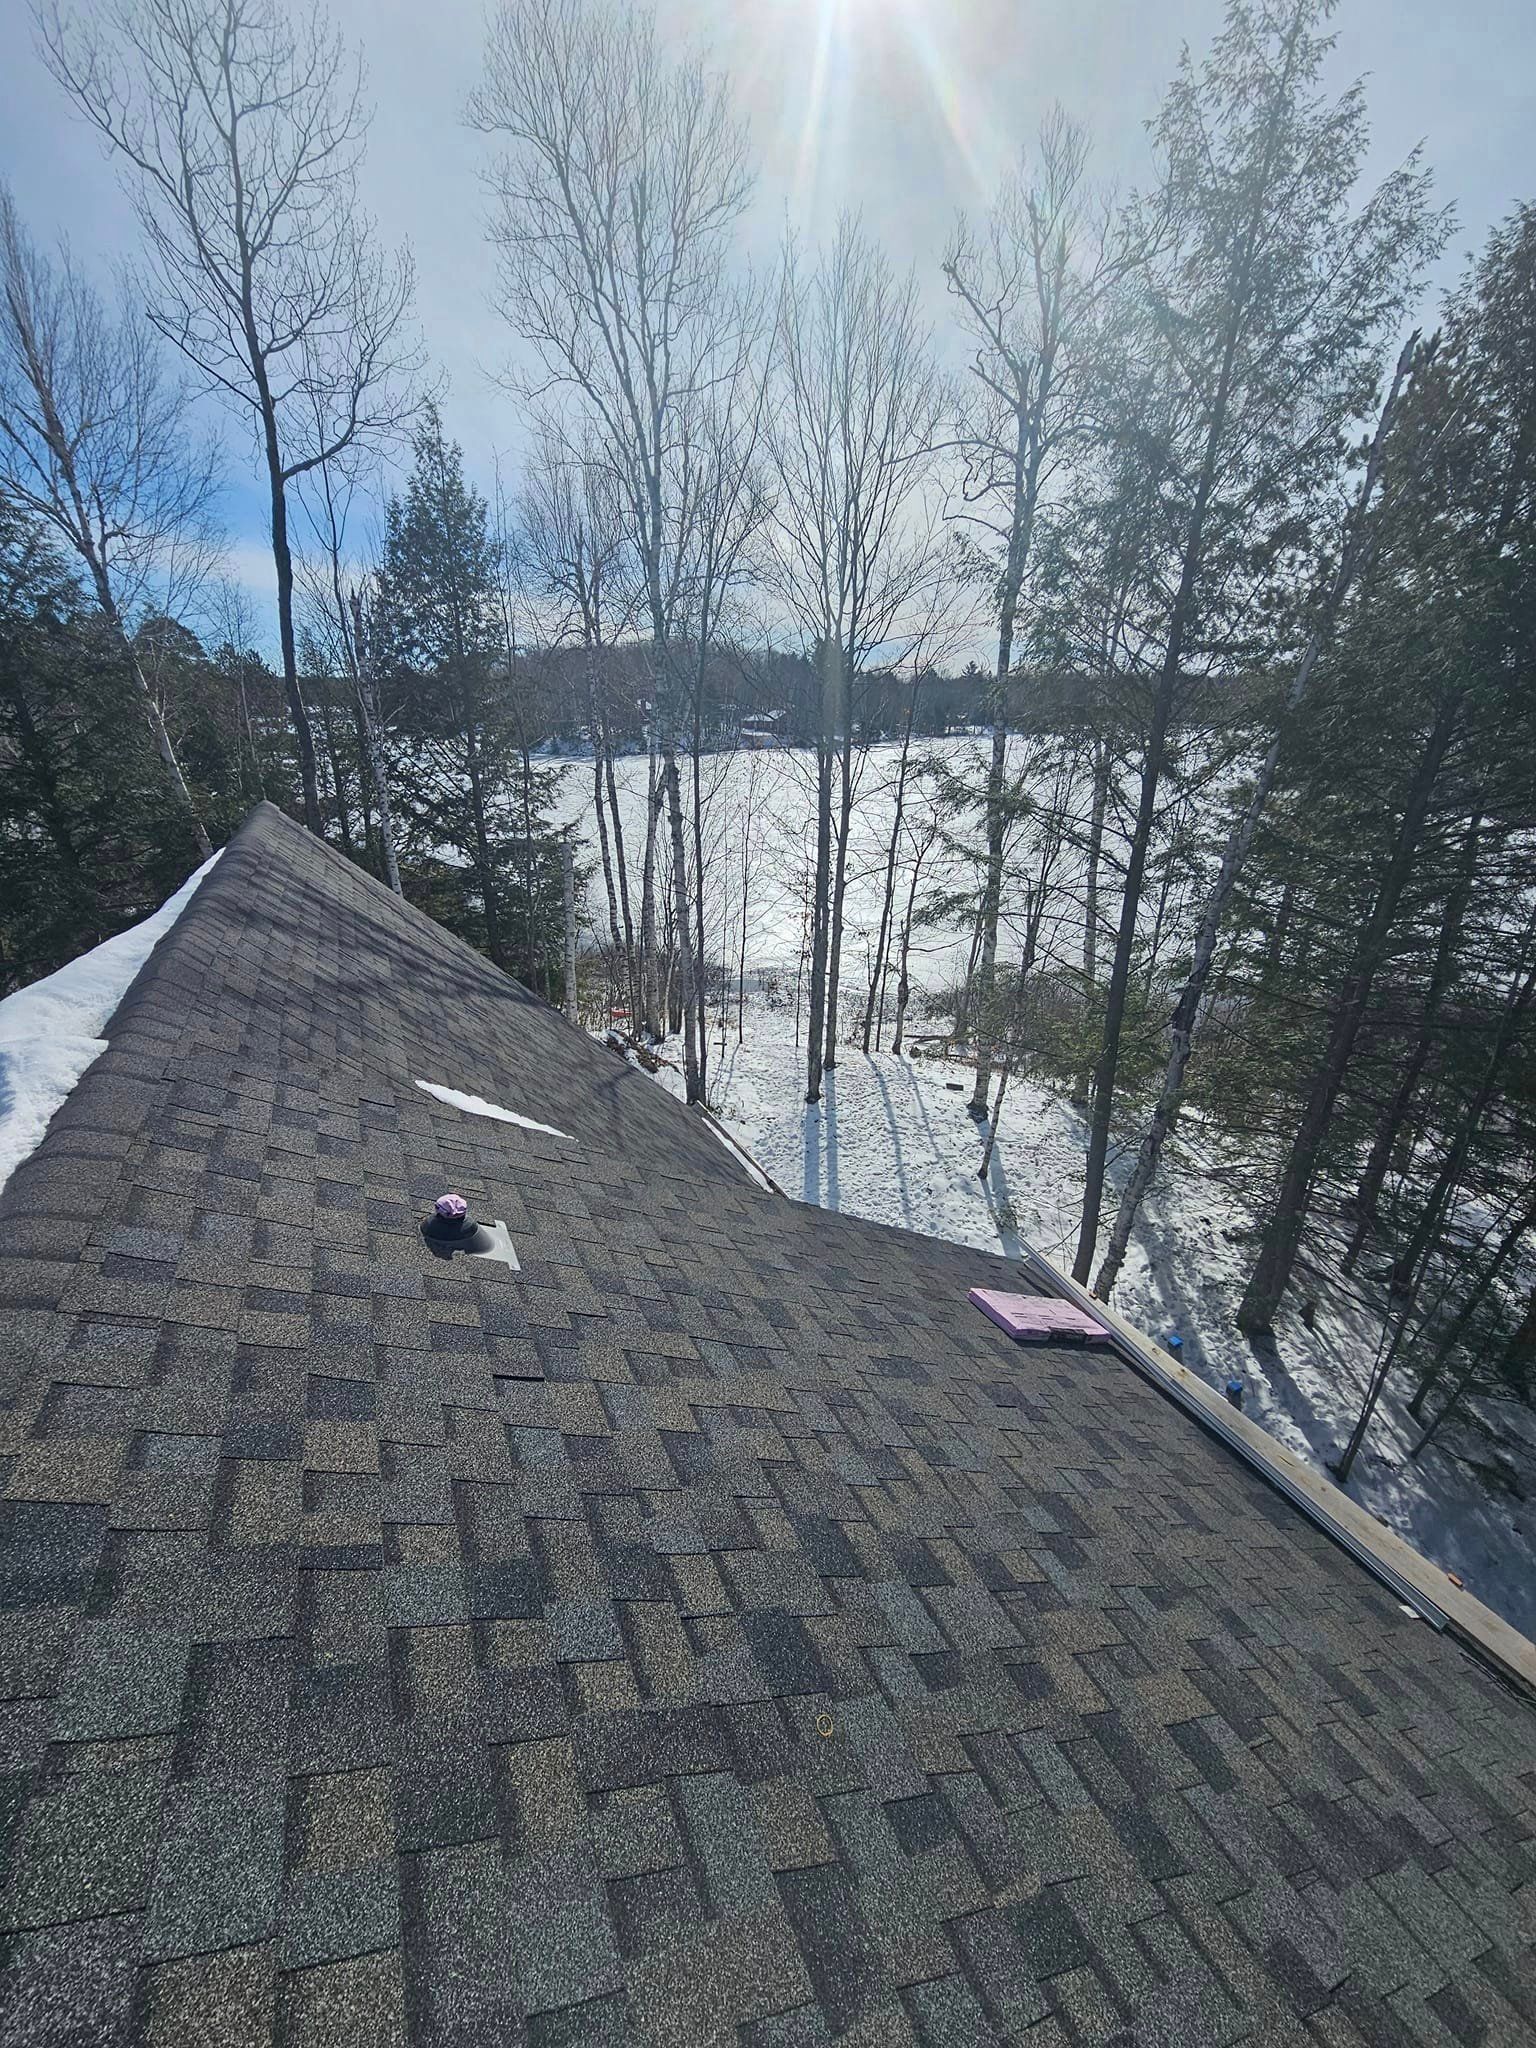 A roof with a view of a lake and trees in the background.